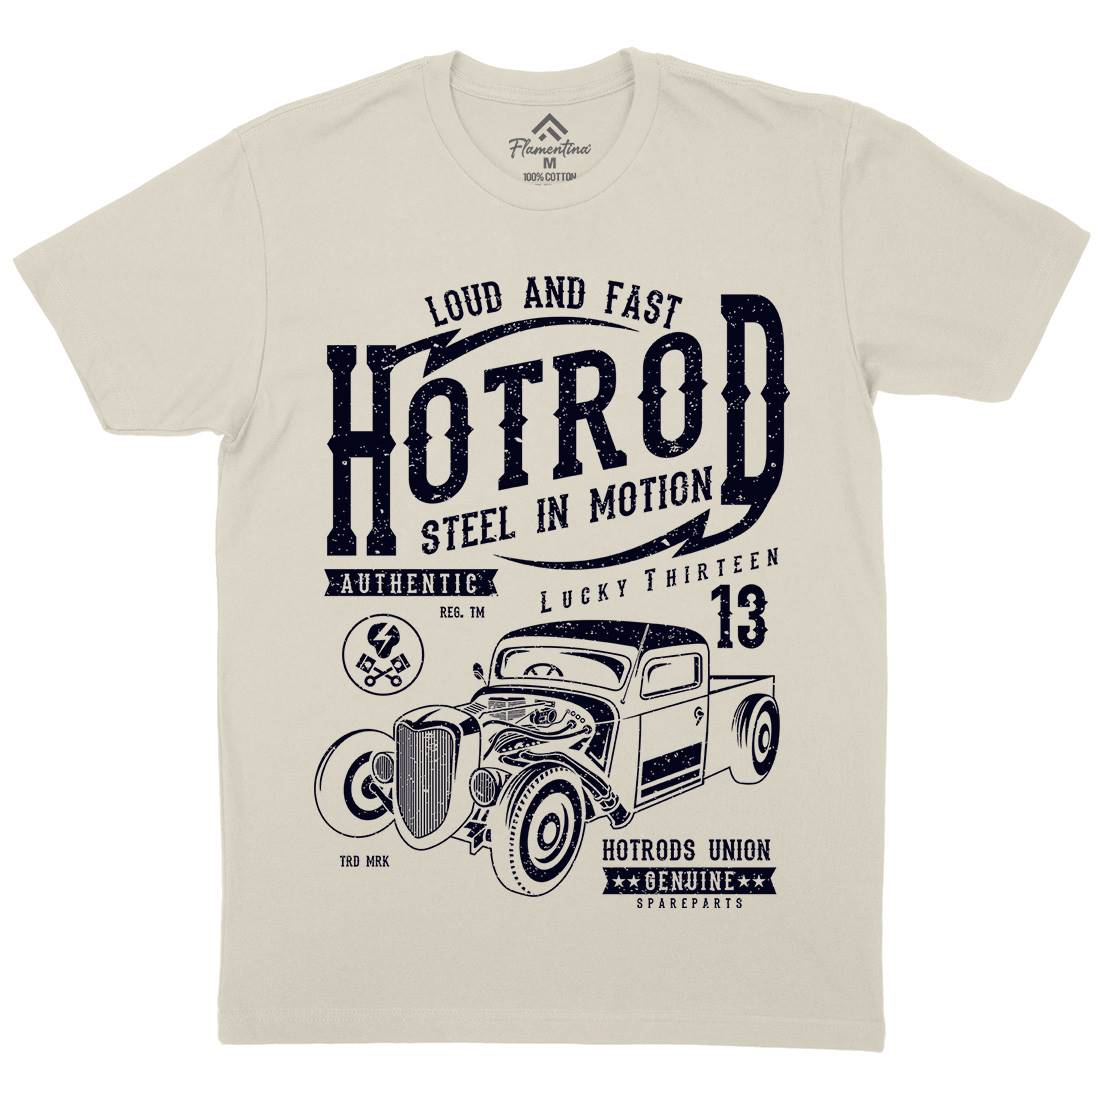 Steel In Motion Mens Organic Crew Neck T-Shirt Cars A767